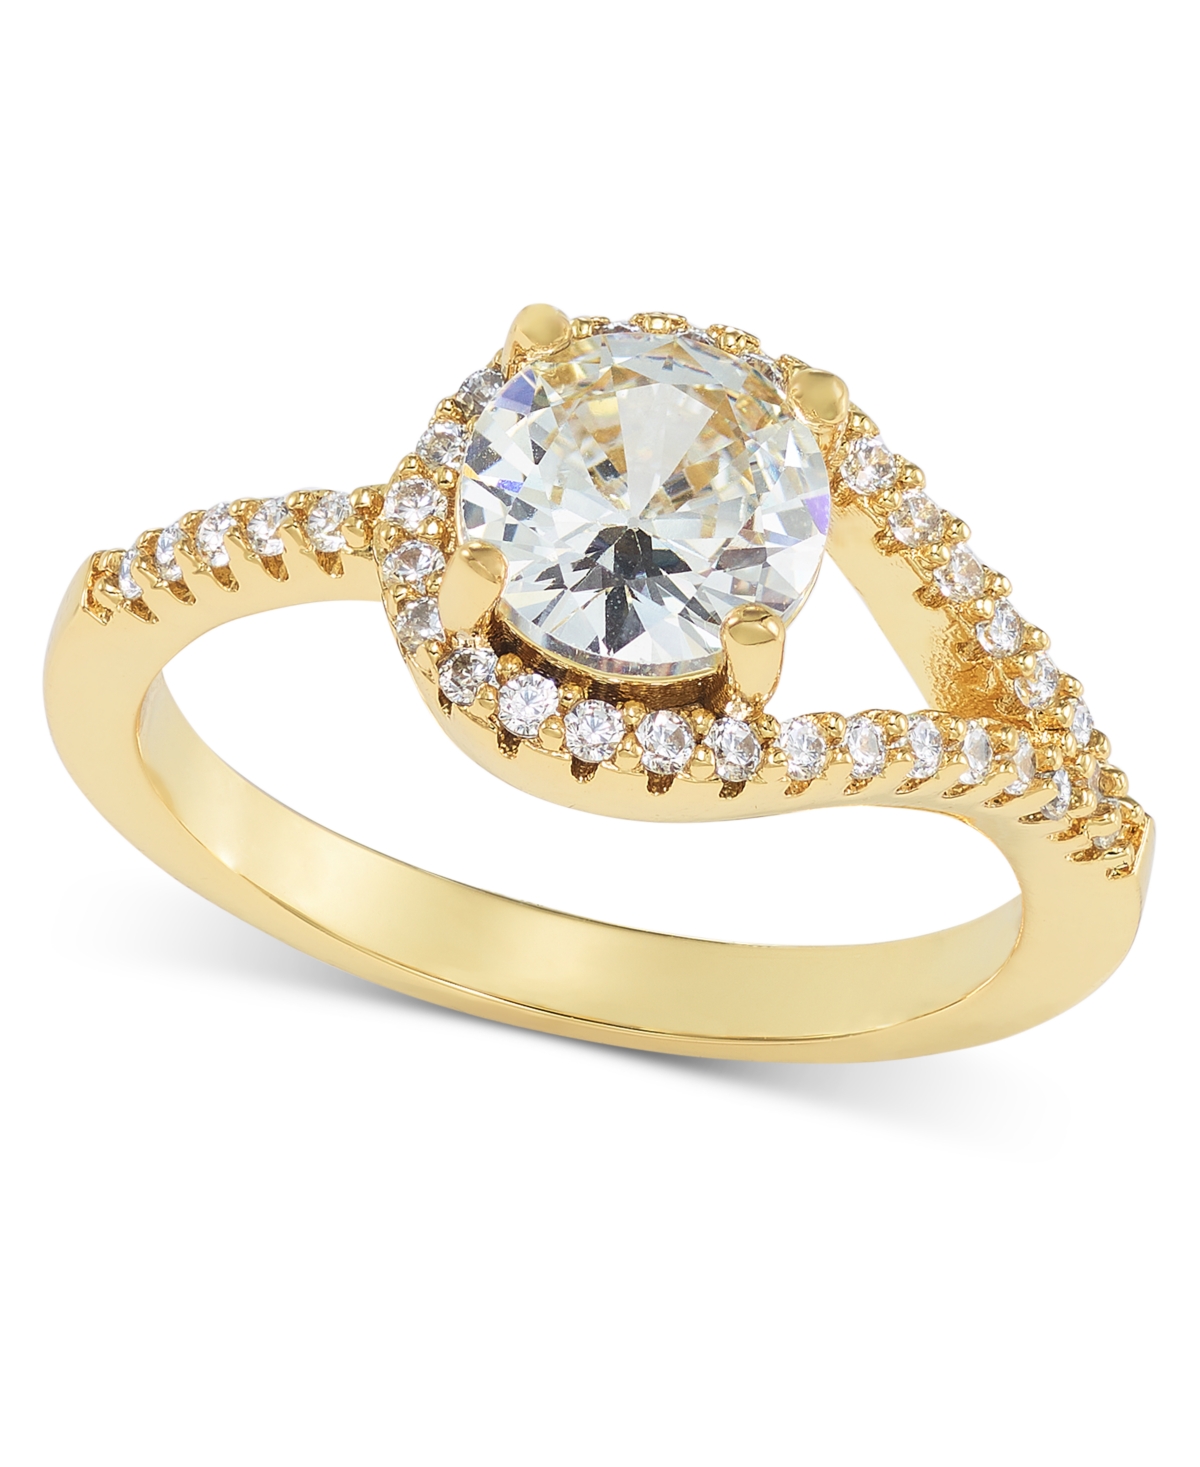 Gold-Tone Cubic Zirconia Ring, Created for Macy's - Gold